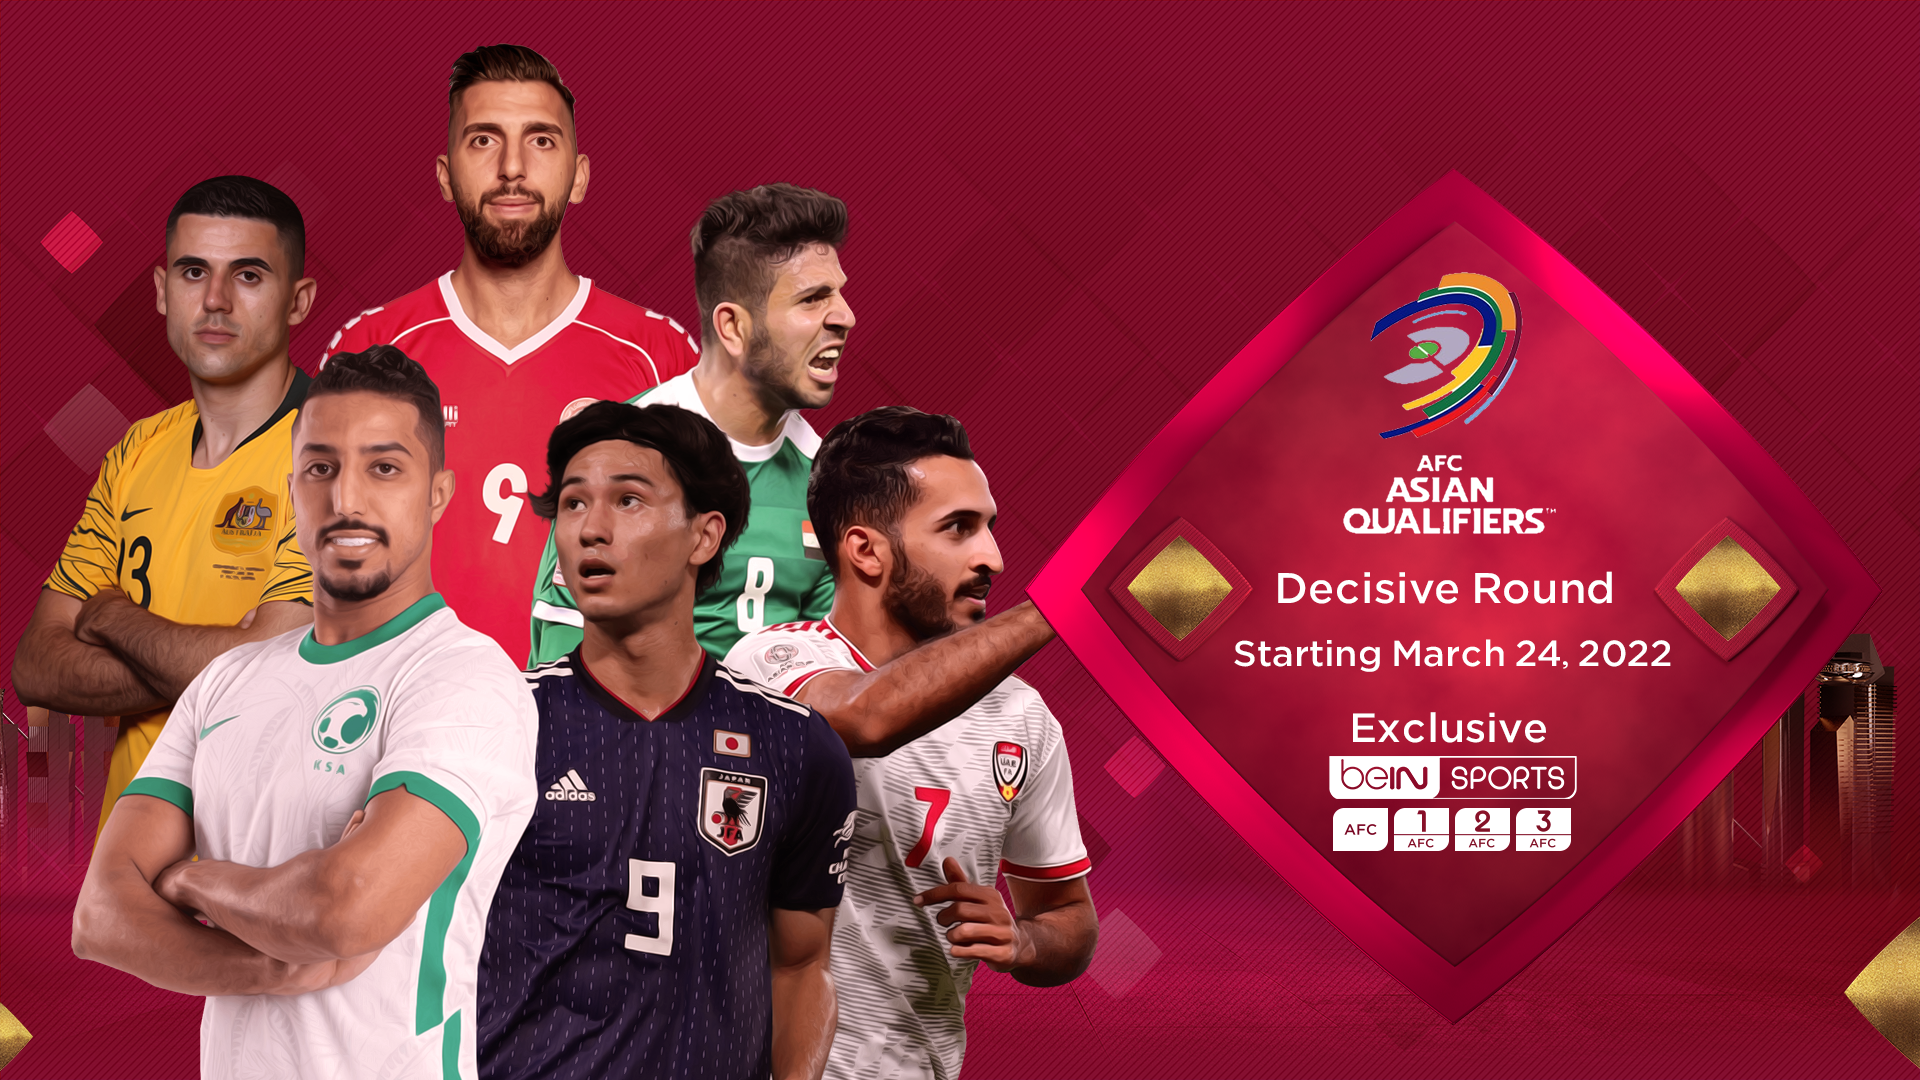 beIN SPORTS Secures Rights to Broadcast the AFC Asian Qualifiers